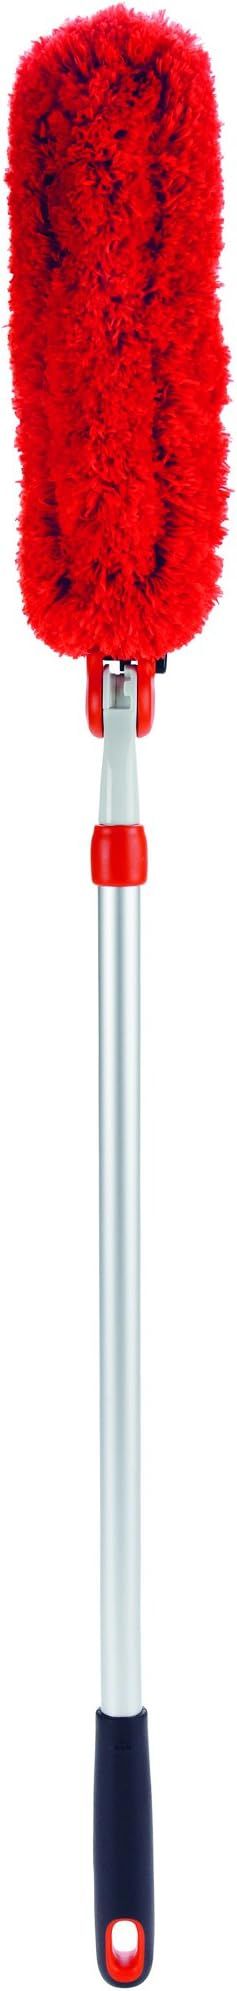 OXO Good Grips Microfiber Extendable Duster 53 inches | Amazon (US)